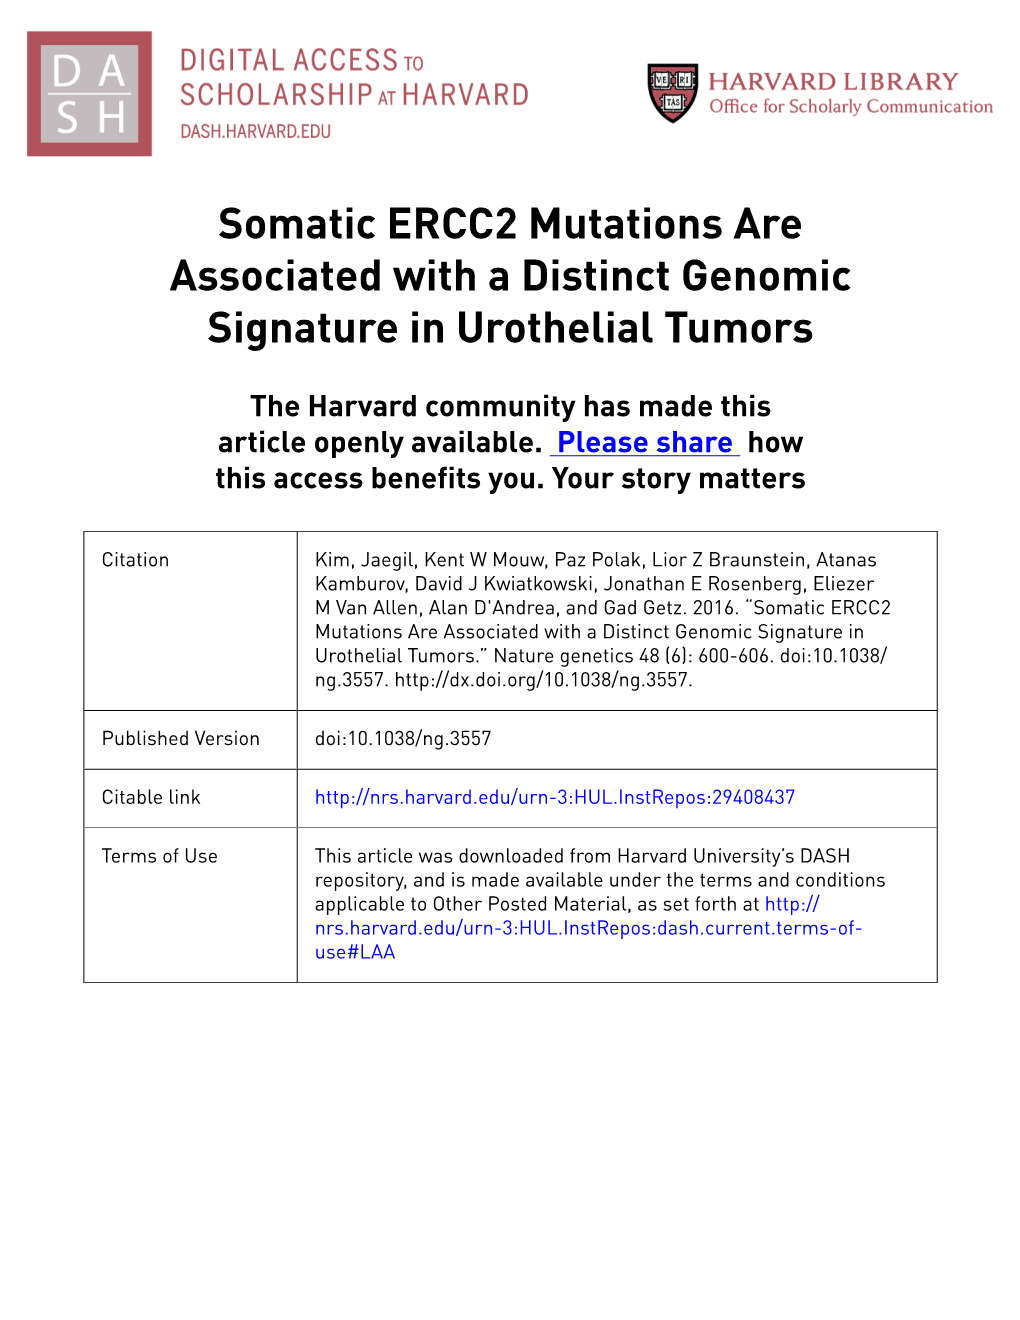 Somatic ERCC2 Mutations Are Associated with a Distinct Genomic Signature in Urothelial Tumors